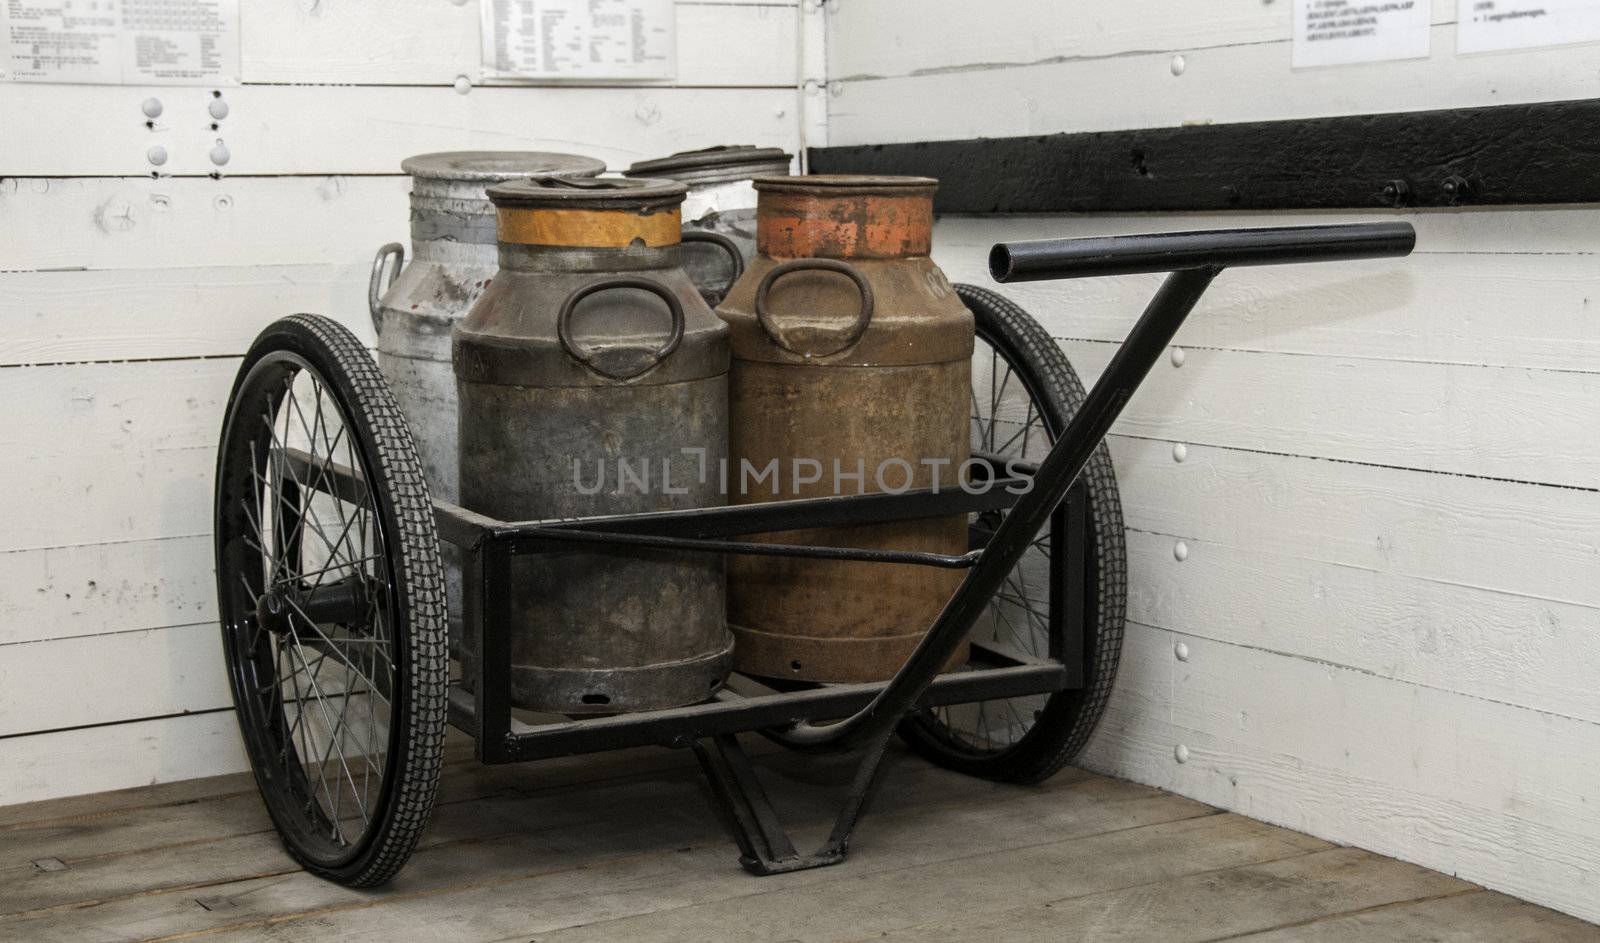 old handcar with churn by compuinfoto